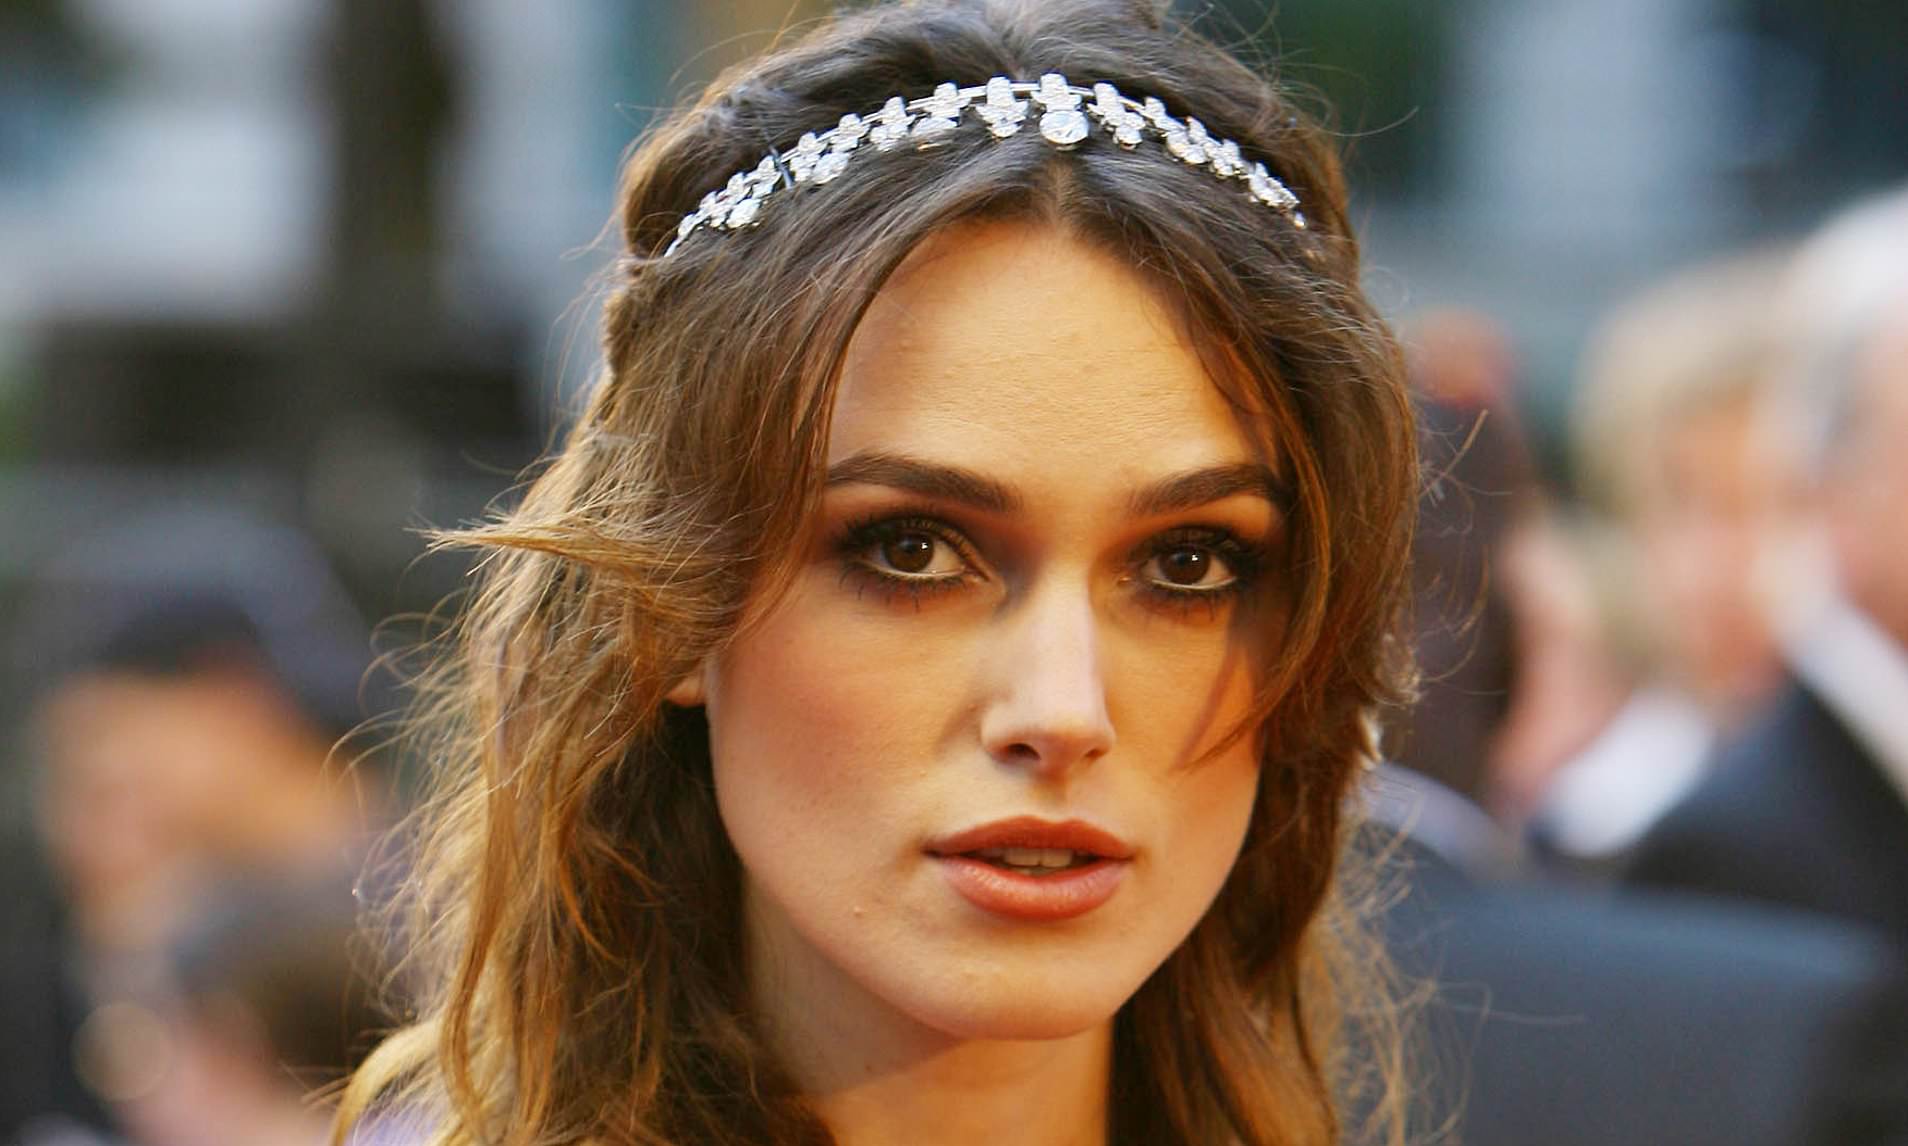 No more nude scenes now I'm a mother, says Keira Knightley ...